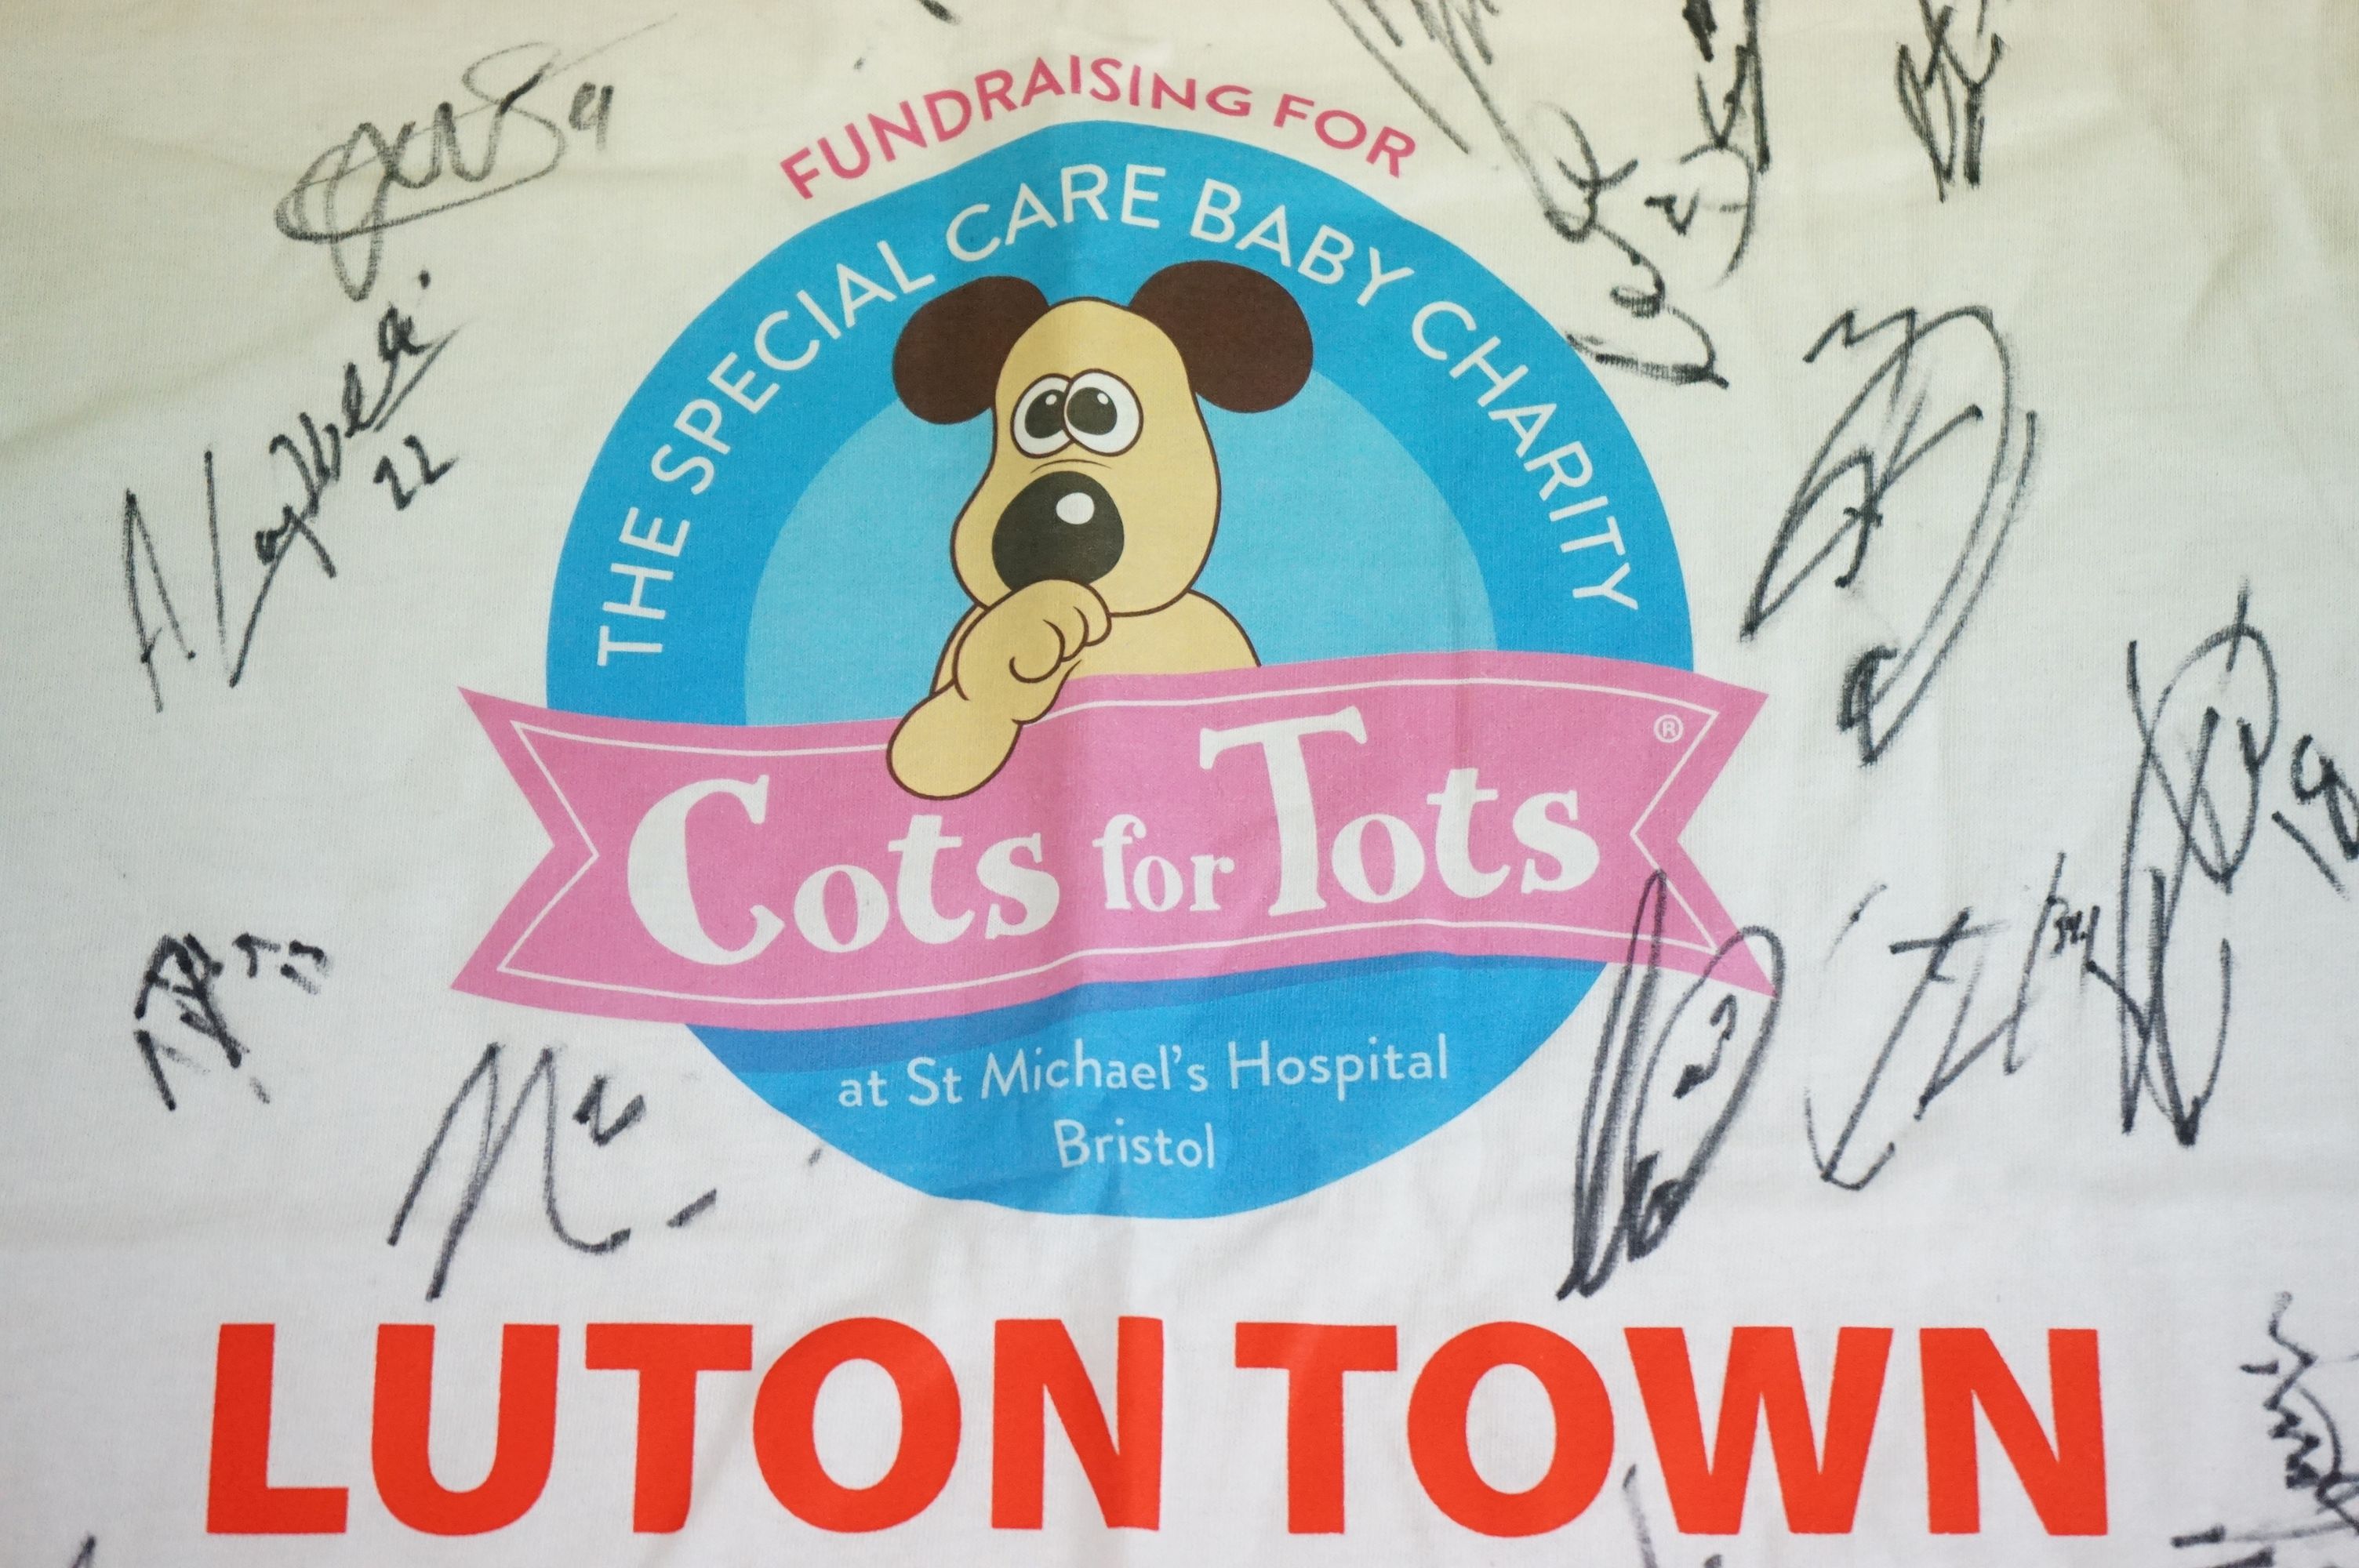 Football interest - Cots for Tots (The Special Care Baby Charity at St Michael's Hospital, Bristol ) - Image 2 of 15